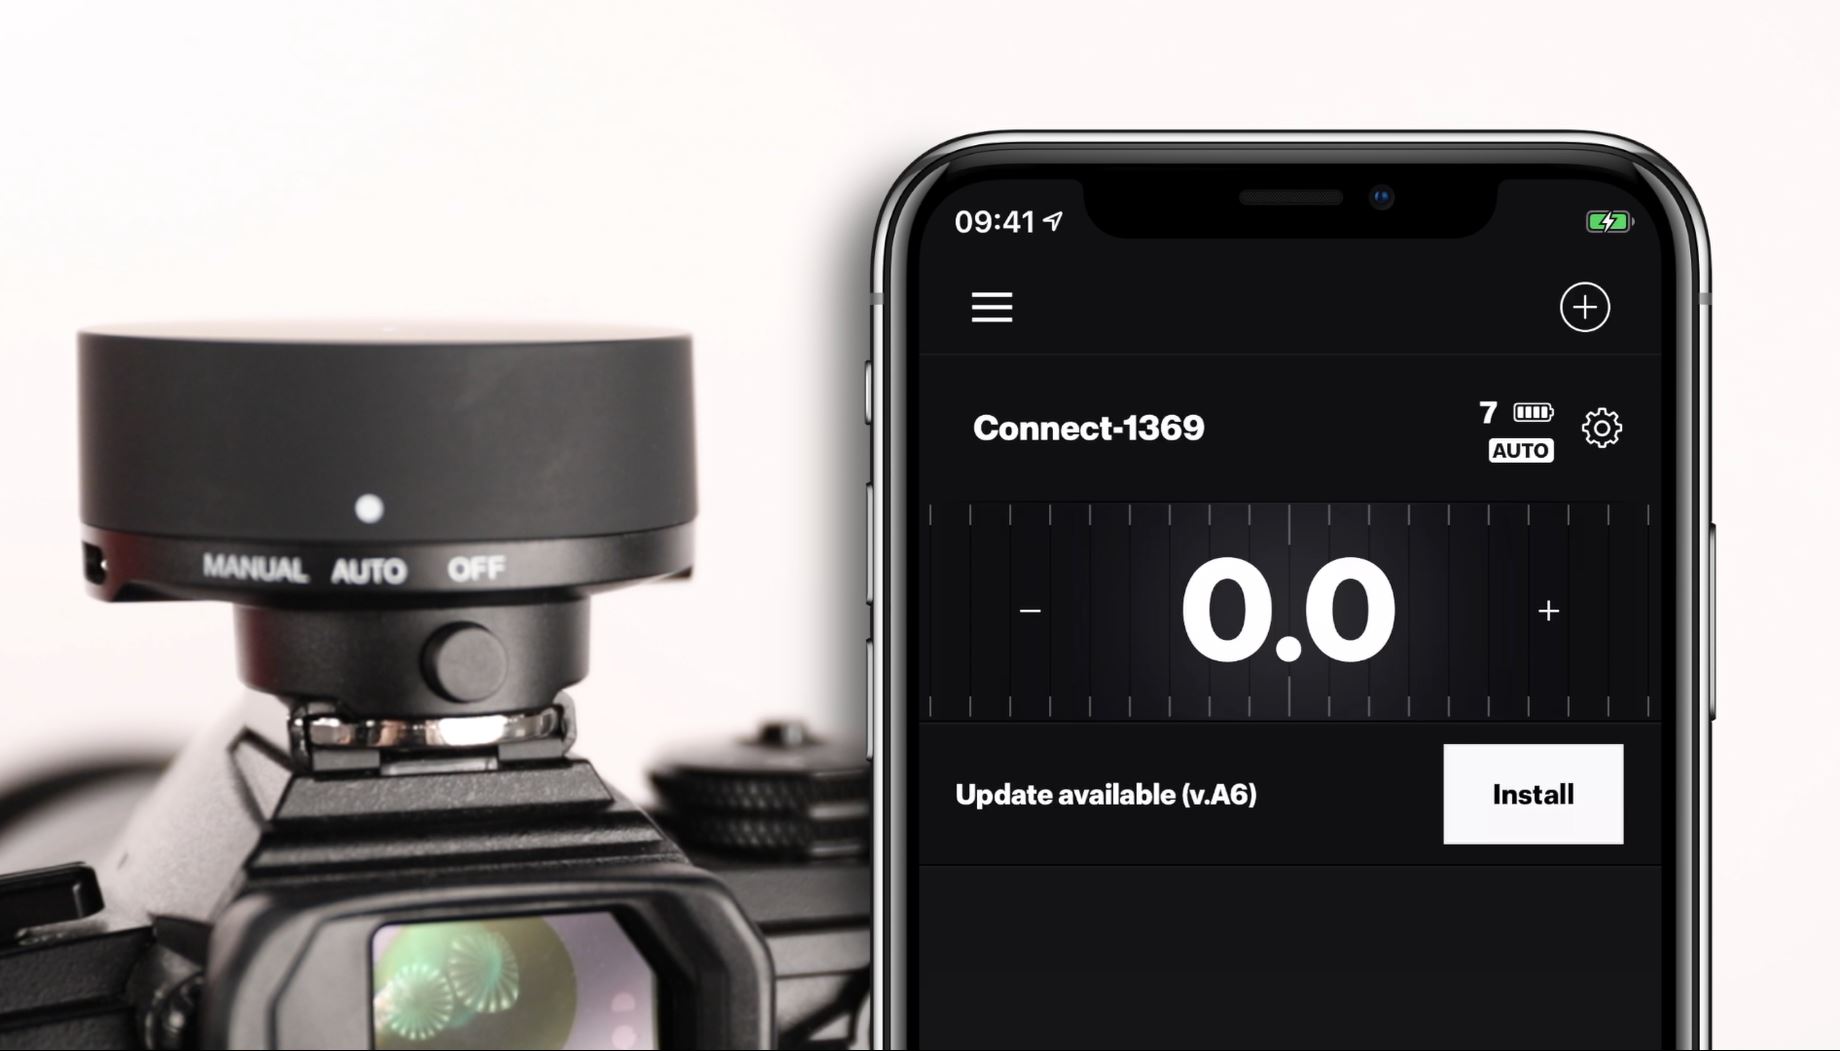 Getting started with the Profoto app and Profoto Connect